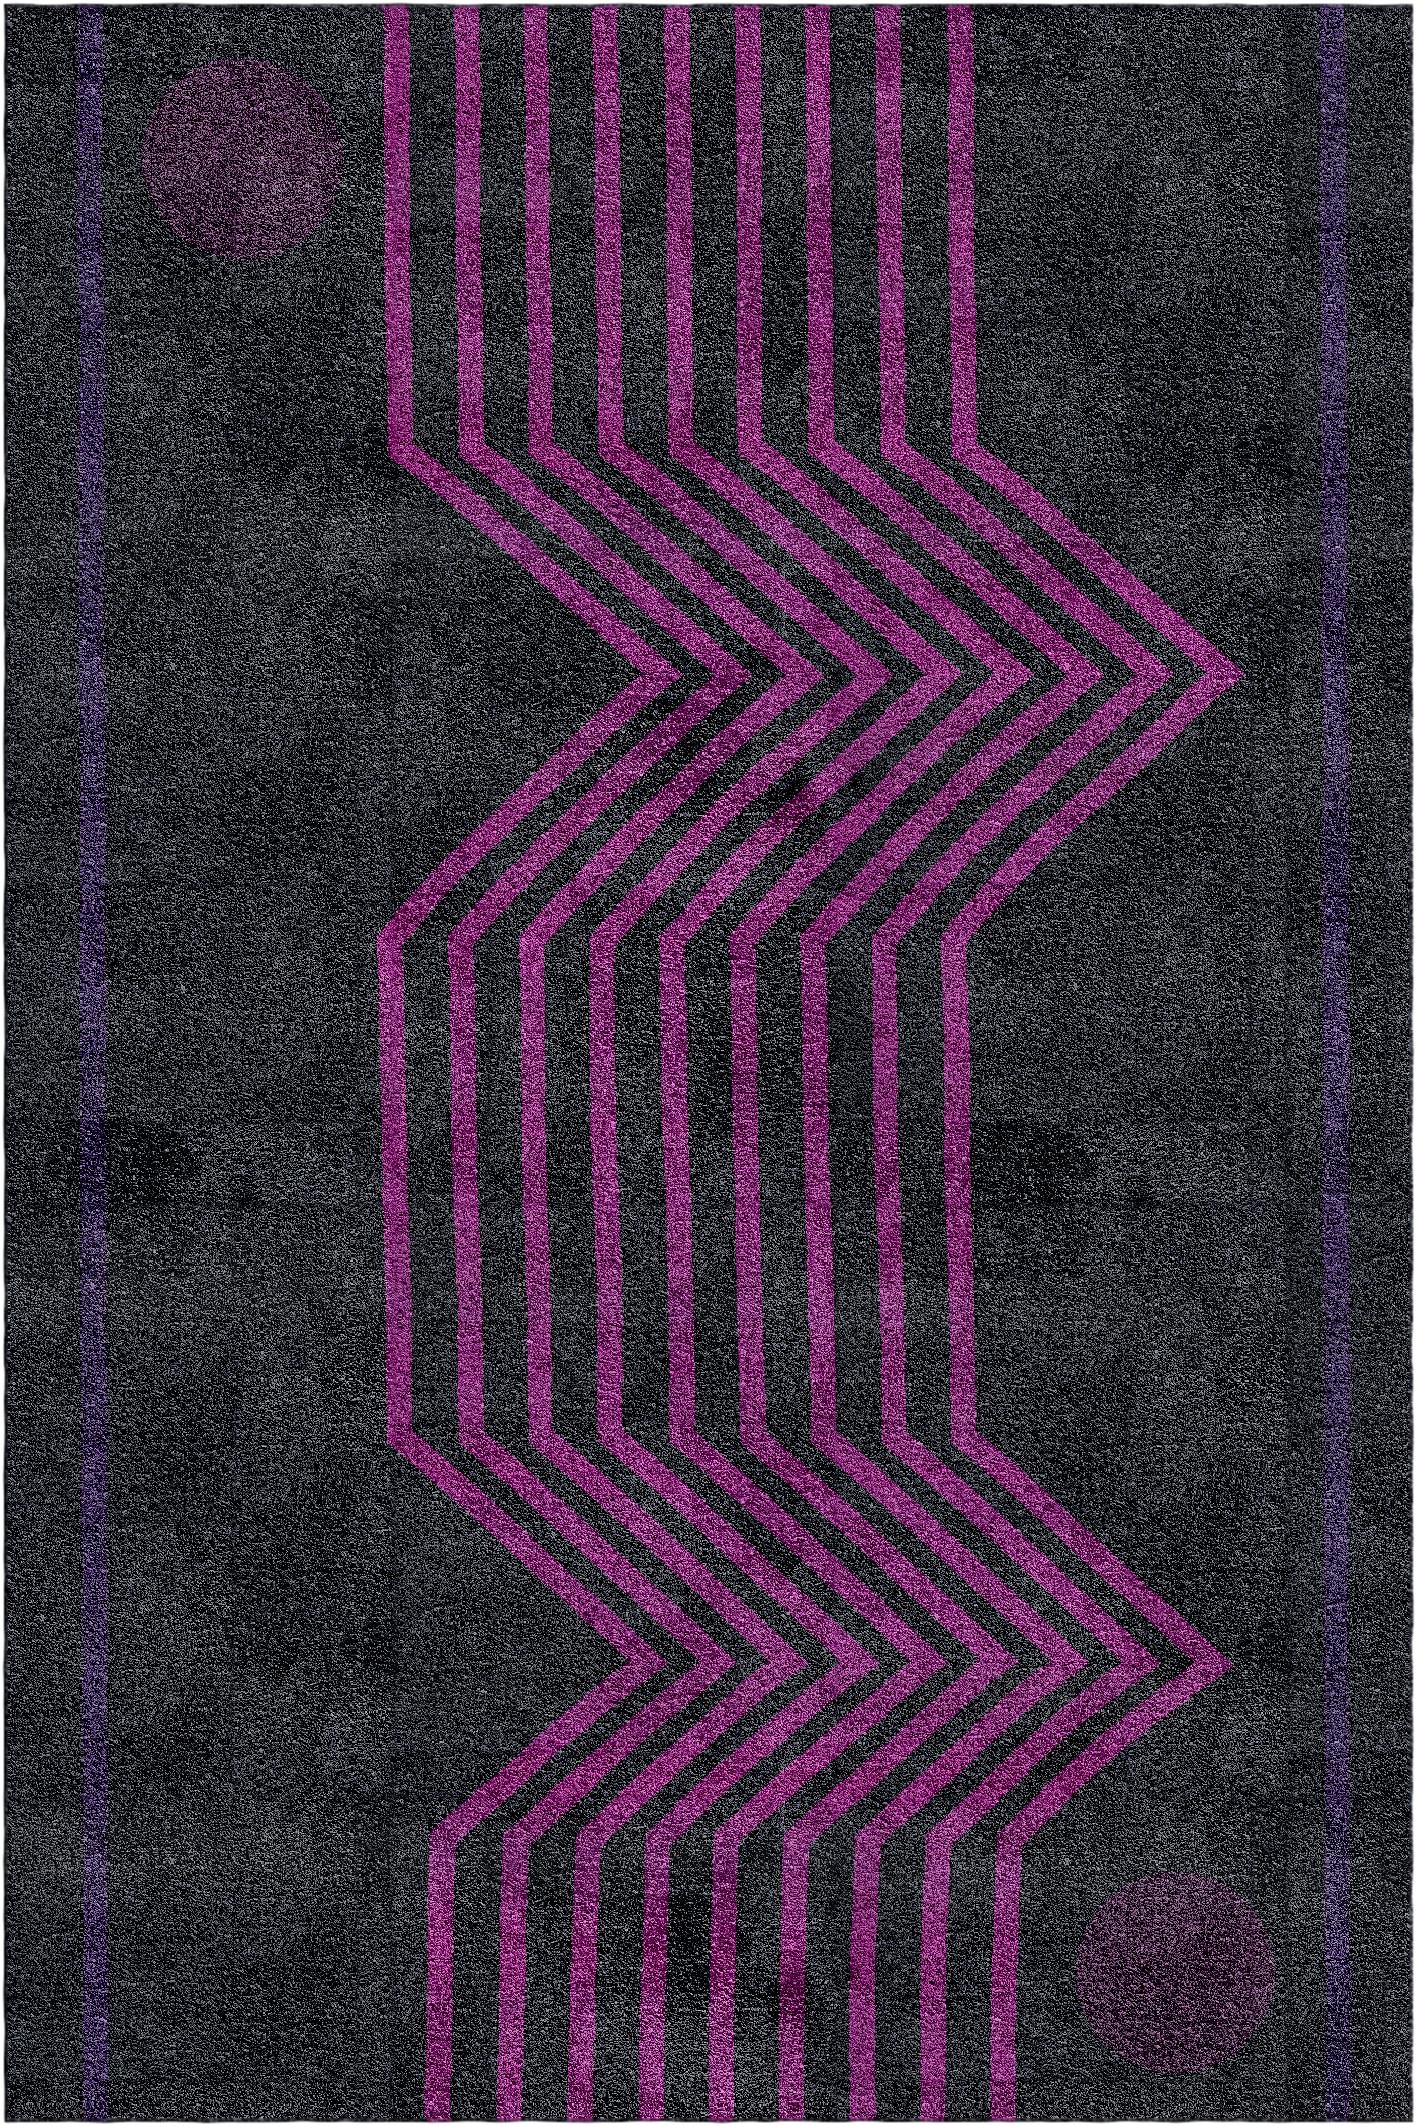 Futuro rug IV by Vanessa Ordoñez.
Dimensions: D 300 x W 200 x H 1.5 cm
Materials: Bamboo fibers and linen.

A striking design by Vanessa Ordoñez, this gorgeous rug will add sophistication and allure in any contemporary home. Hand-tufted in